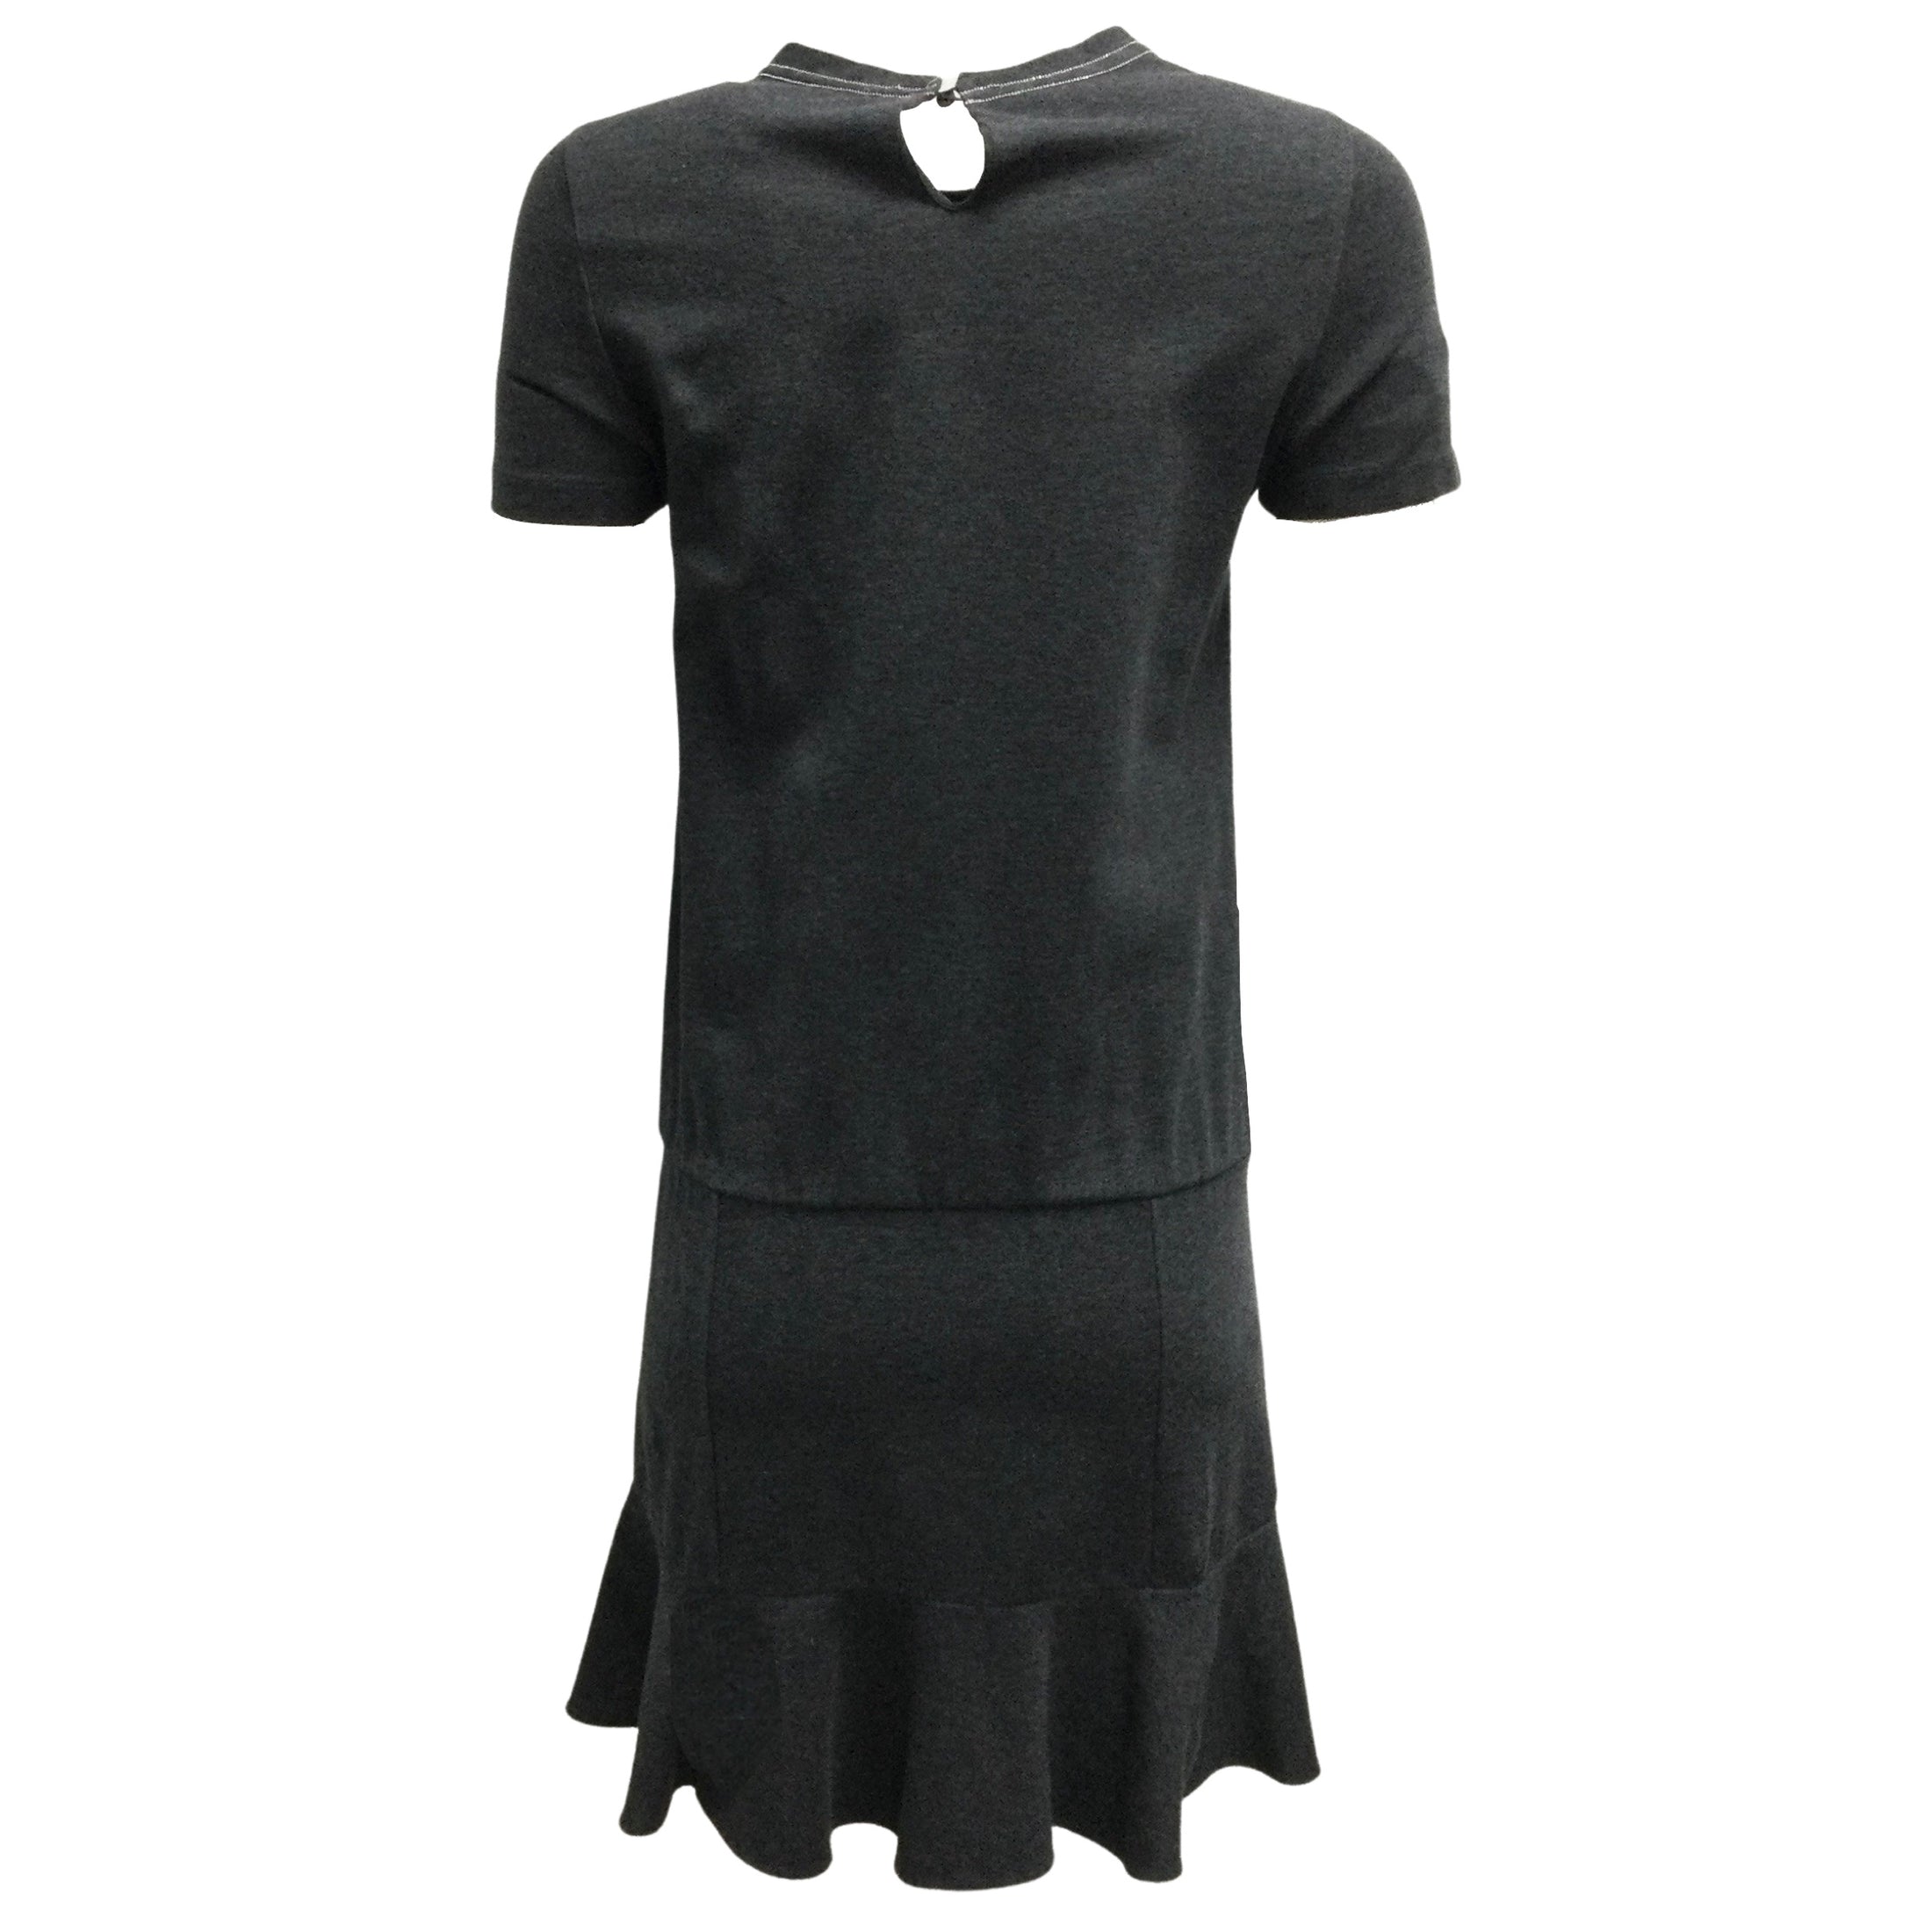 Brunello Cucinelli Charcoal Grey Sleeved Cotton Short Casual Dress